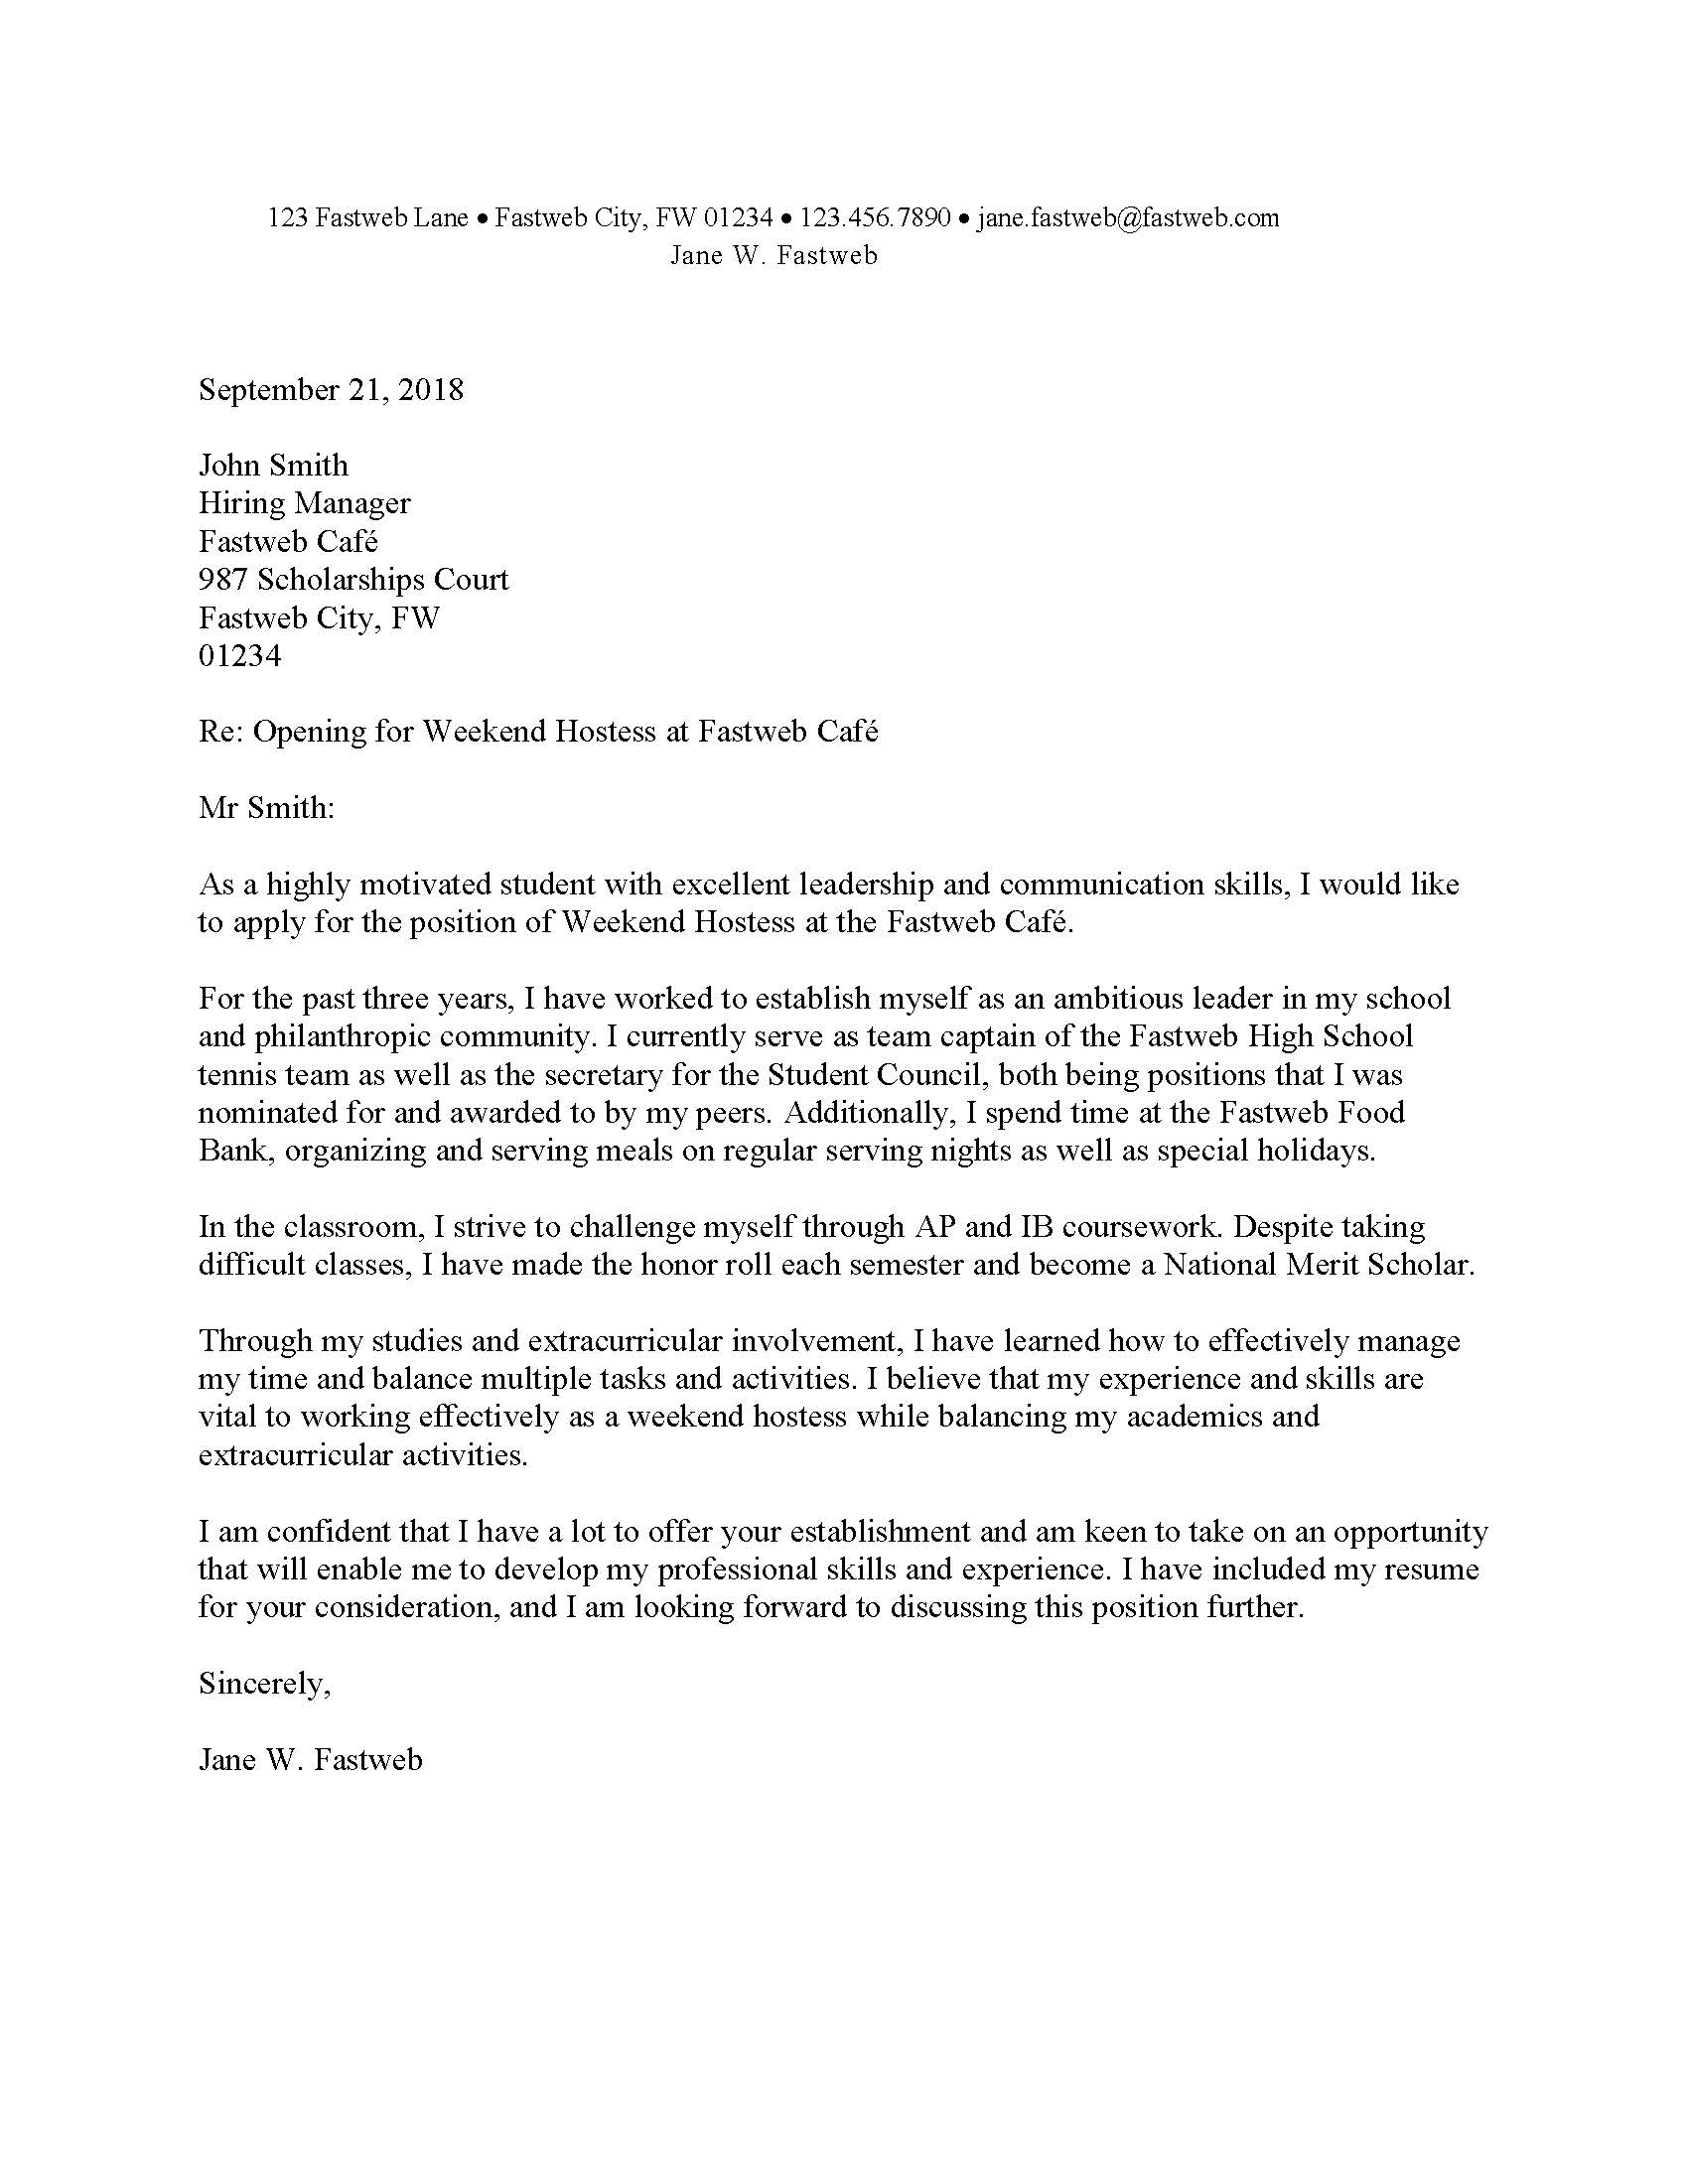 application letter for a job for the first time